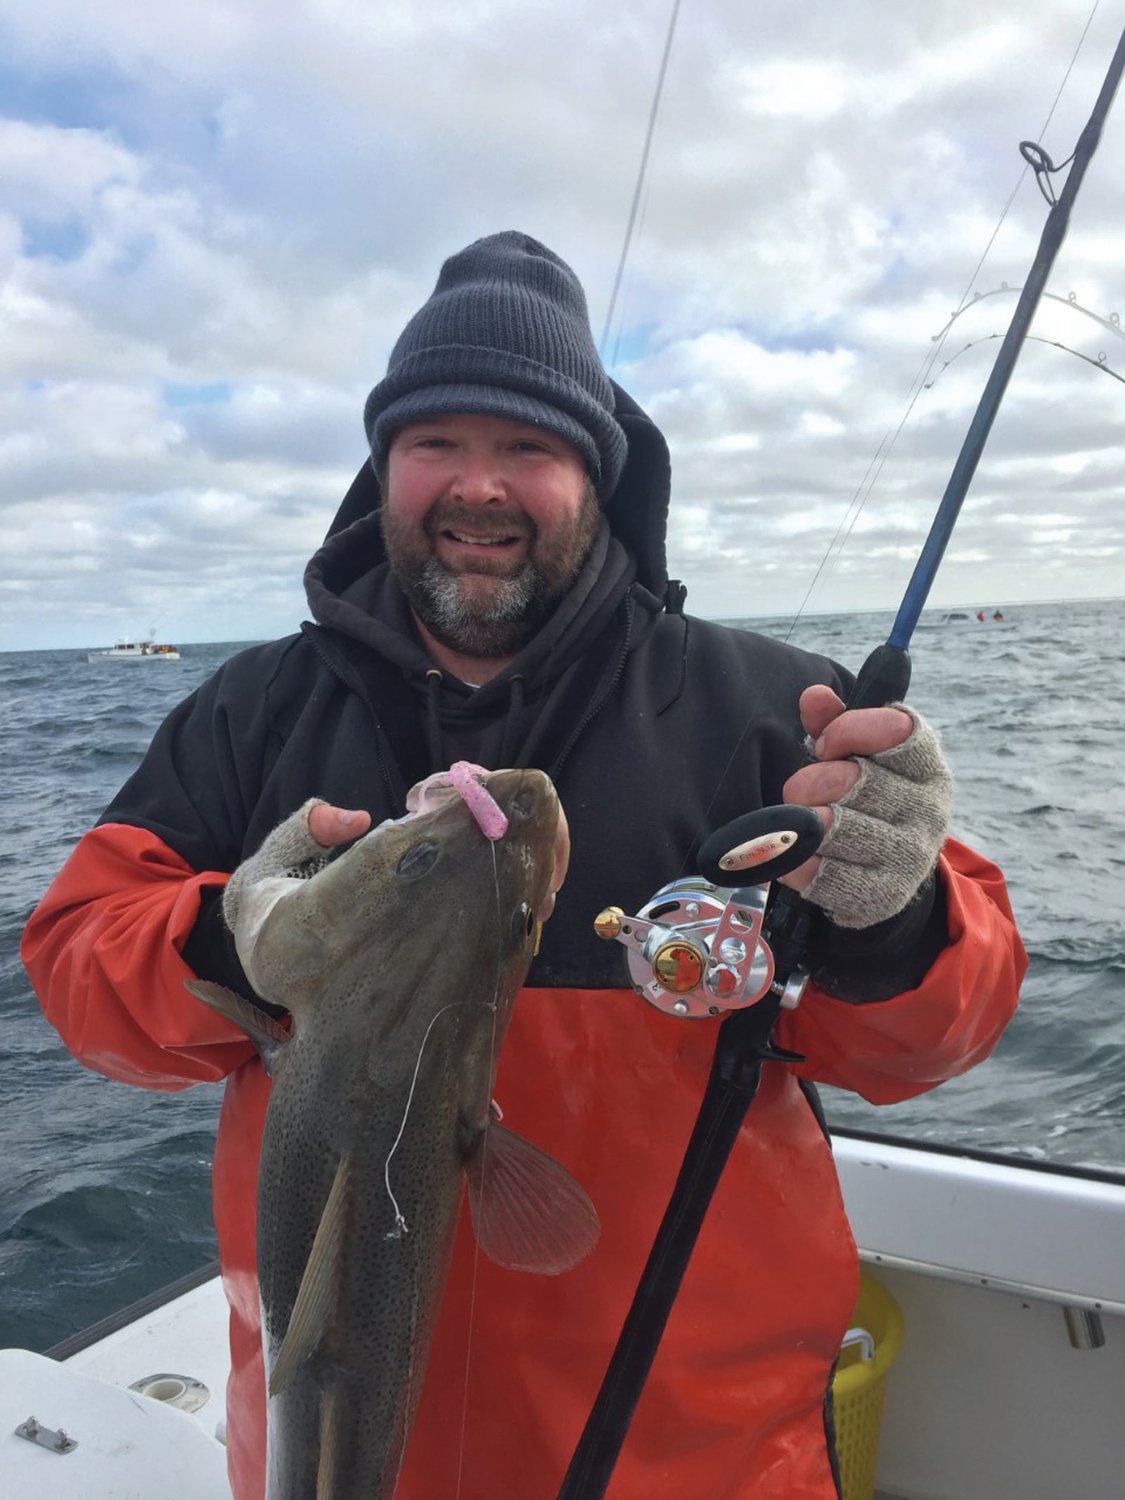 ALL-TIME HIGH: Dustin Stevens, owner of RI Kayak Fishing Adventures and pro staff member at the Kayak Centre of RI, North Kingstown, said interest in kayaks and kayak fishing are at an all-time high.